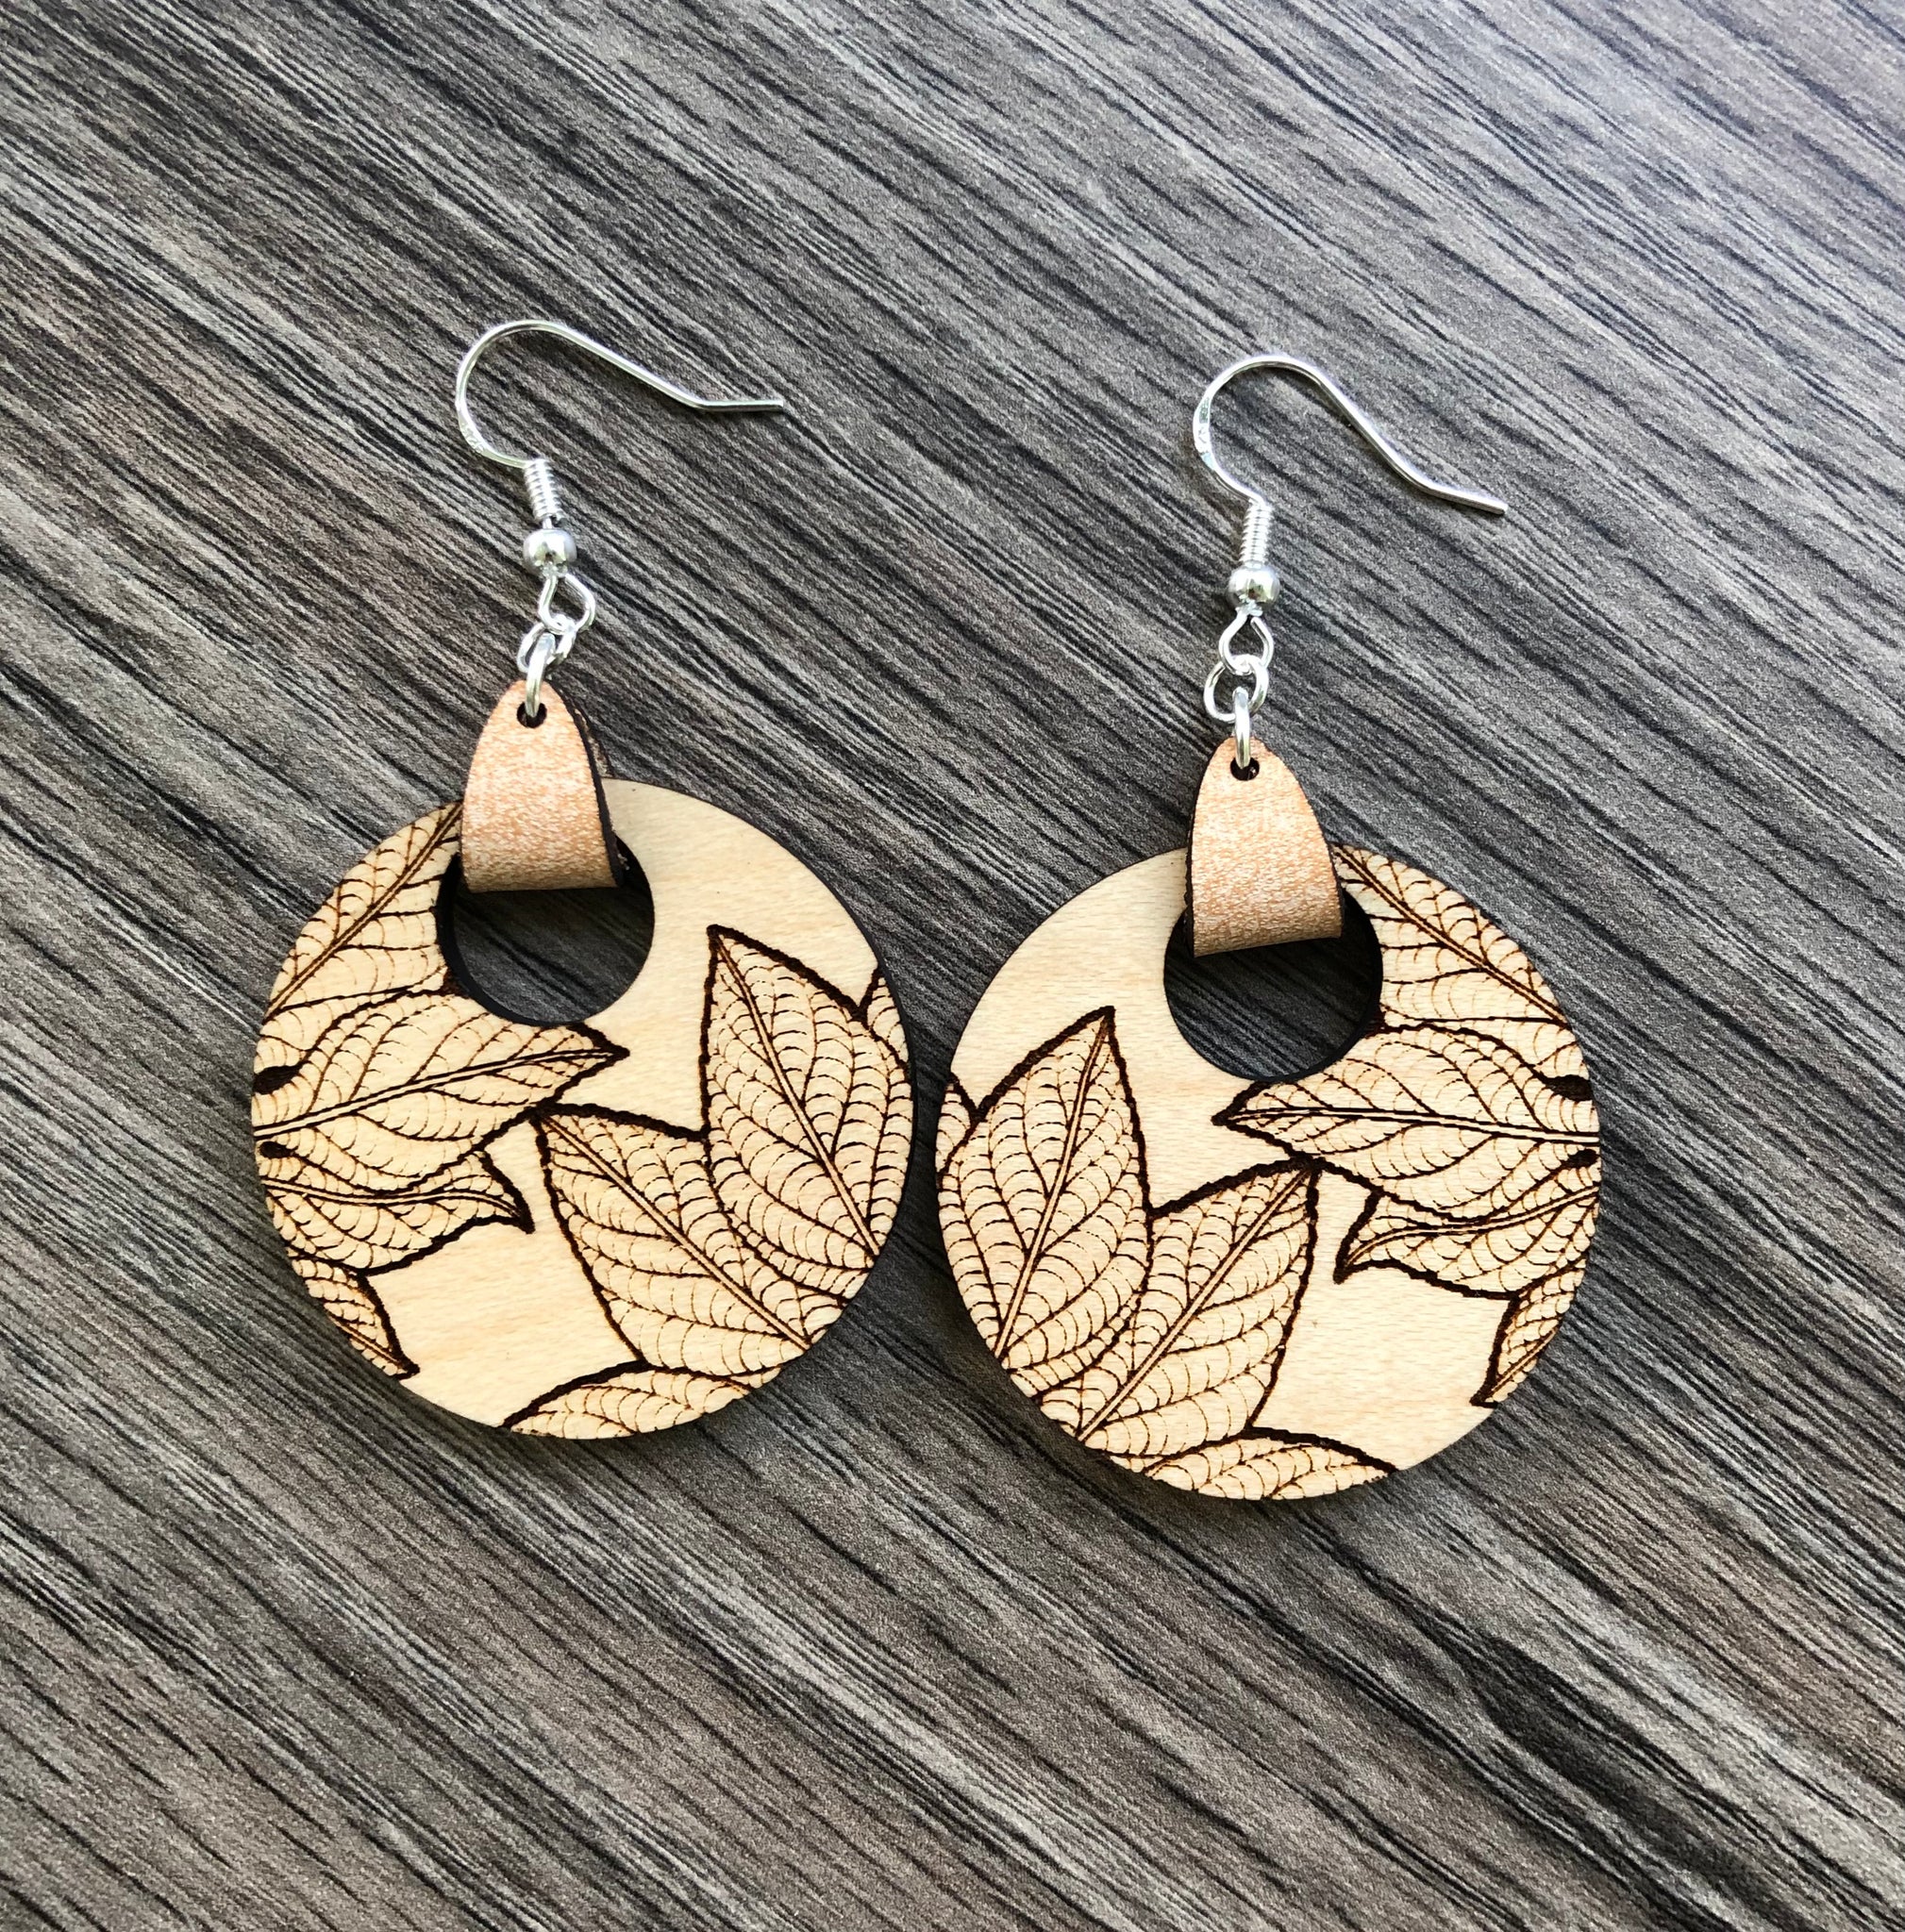 Amazon.com: Layered Leather Leaf Earrings for Women (Turquoise Blue on Warm  Brown) : Handmade Products